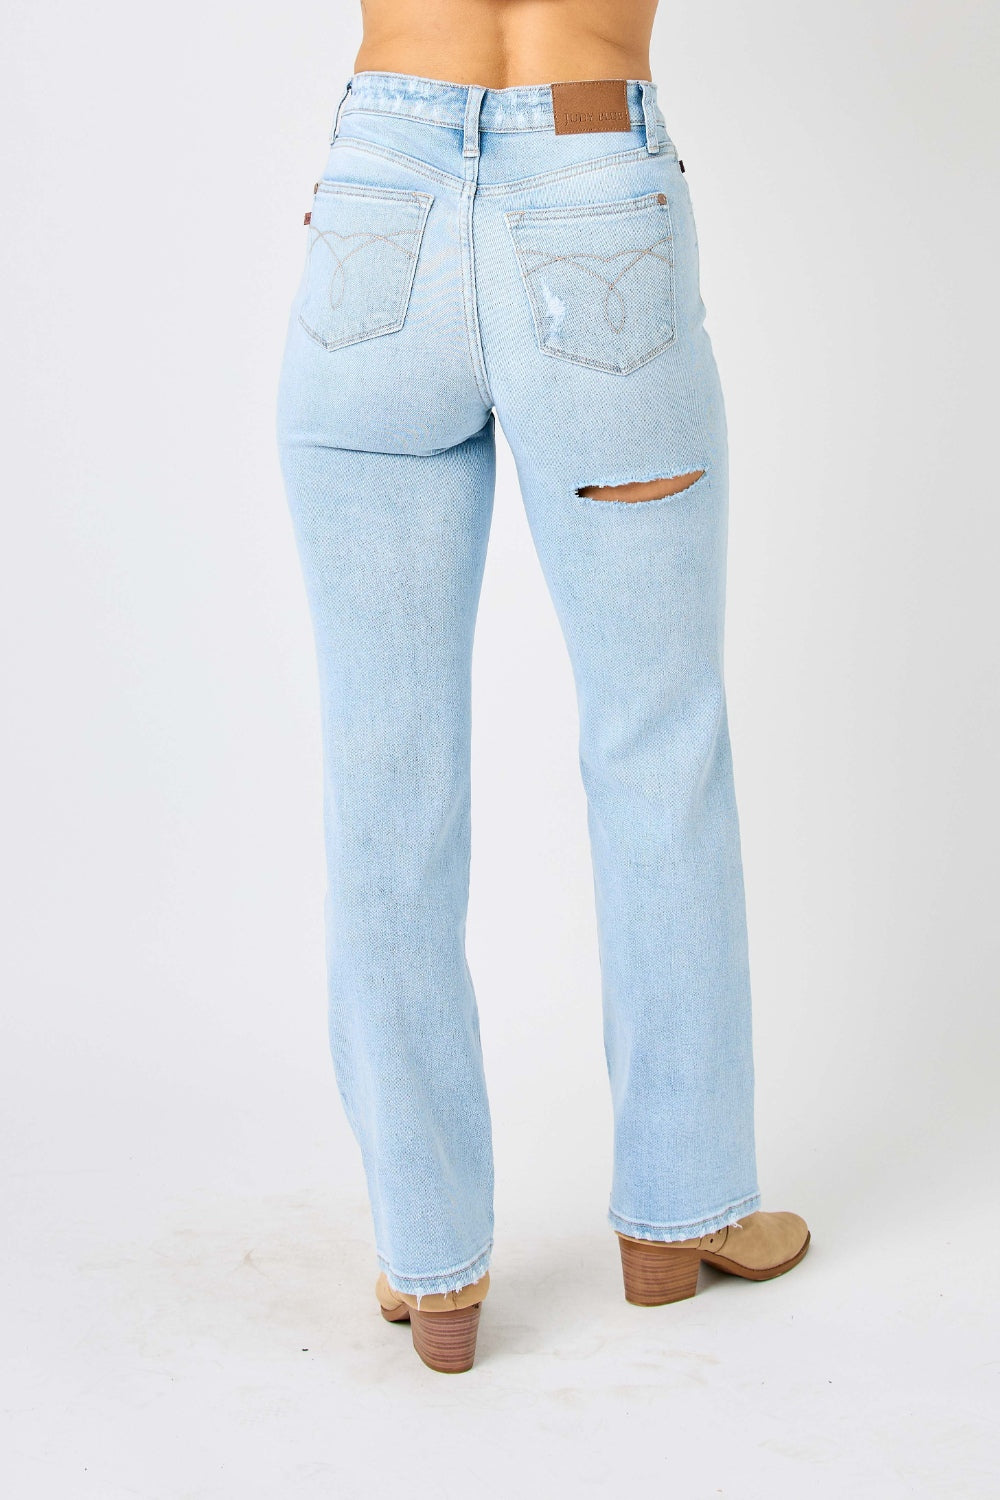 Judy Blue Full Size High Waist Distressed Straight Jeans-Denim-Inspired by Justeen-Women's Clothing Boutique in Chicago, Illinois